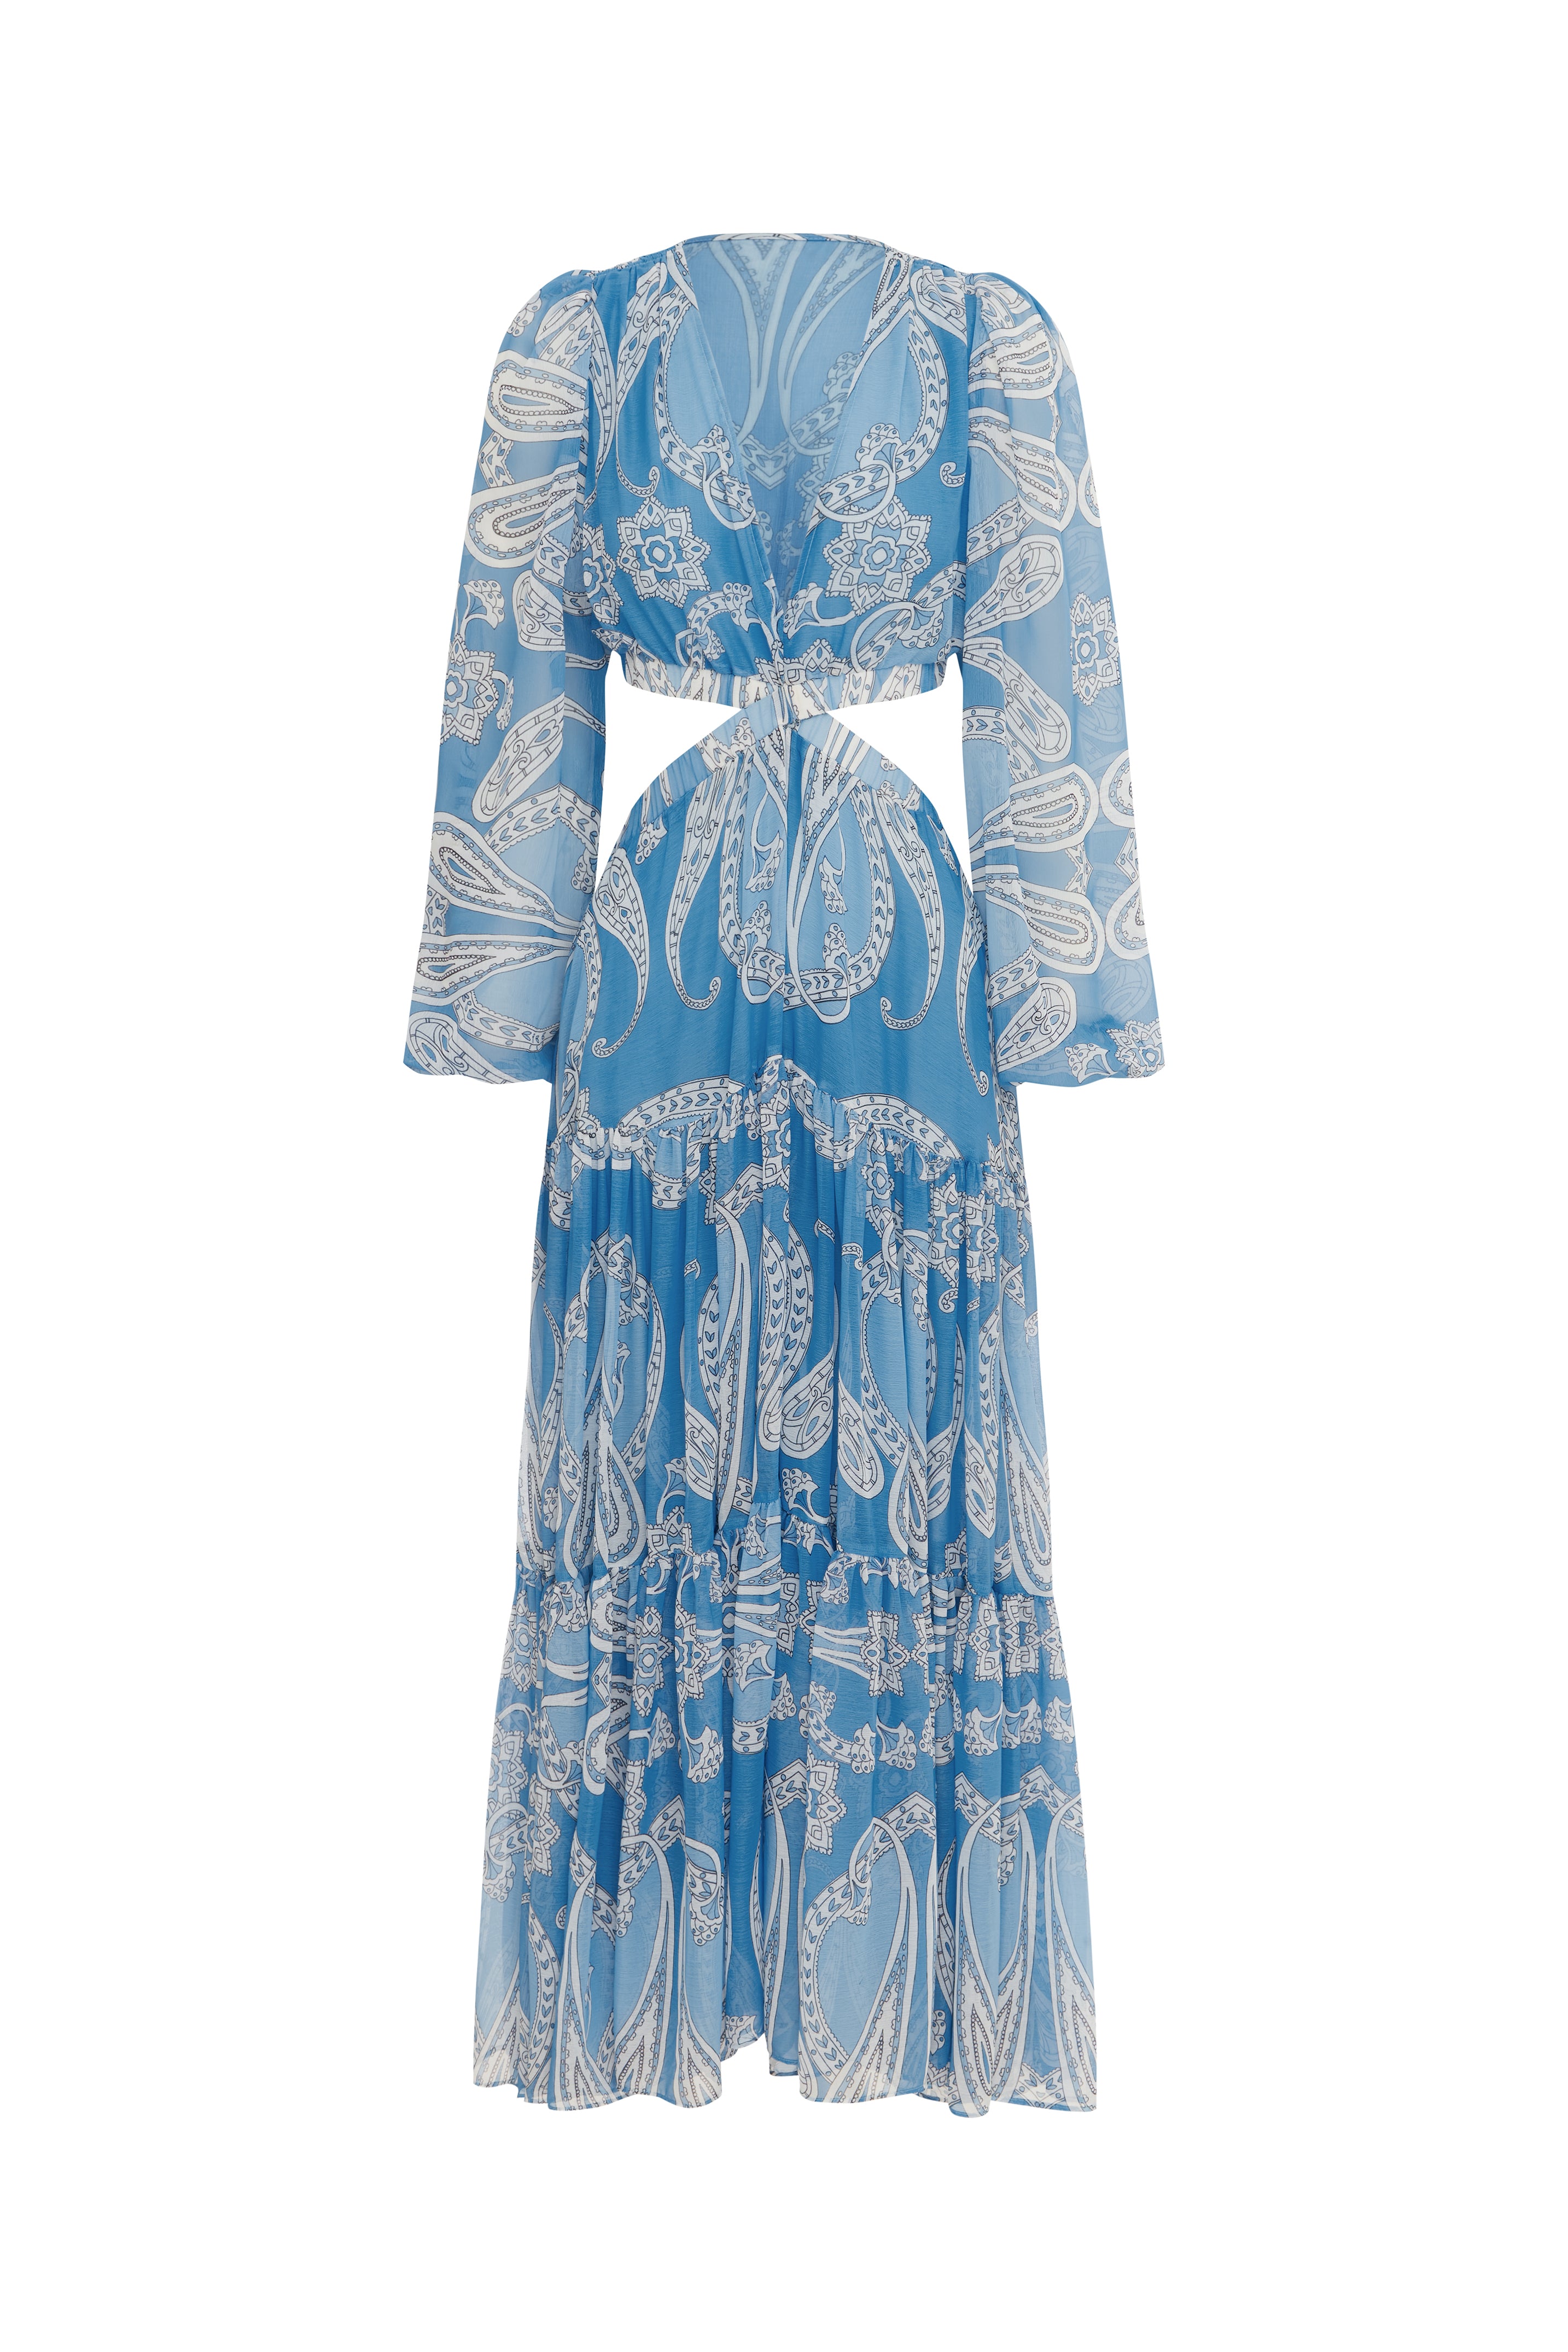 See You In St. Tropez Maxi Dress Blue Paisley